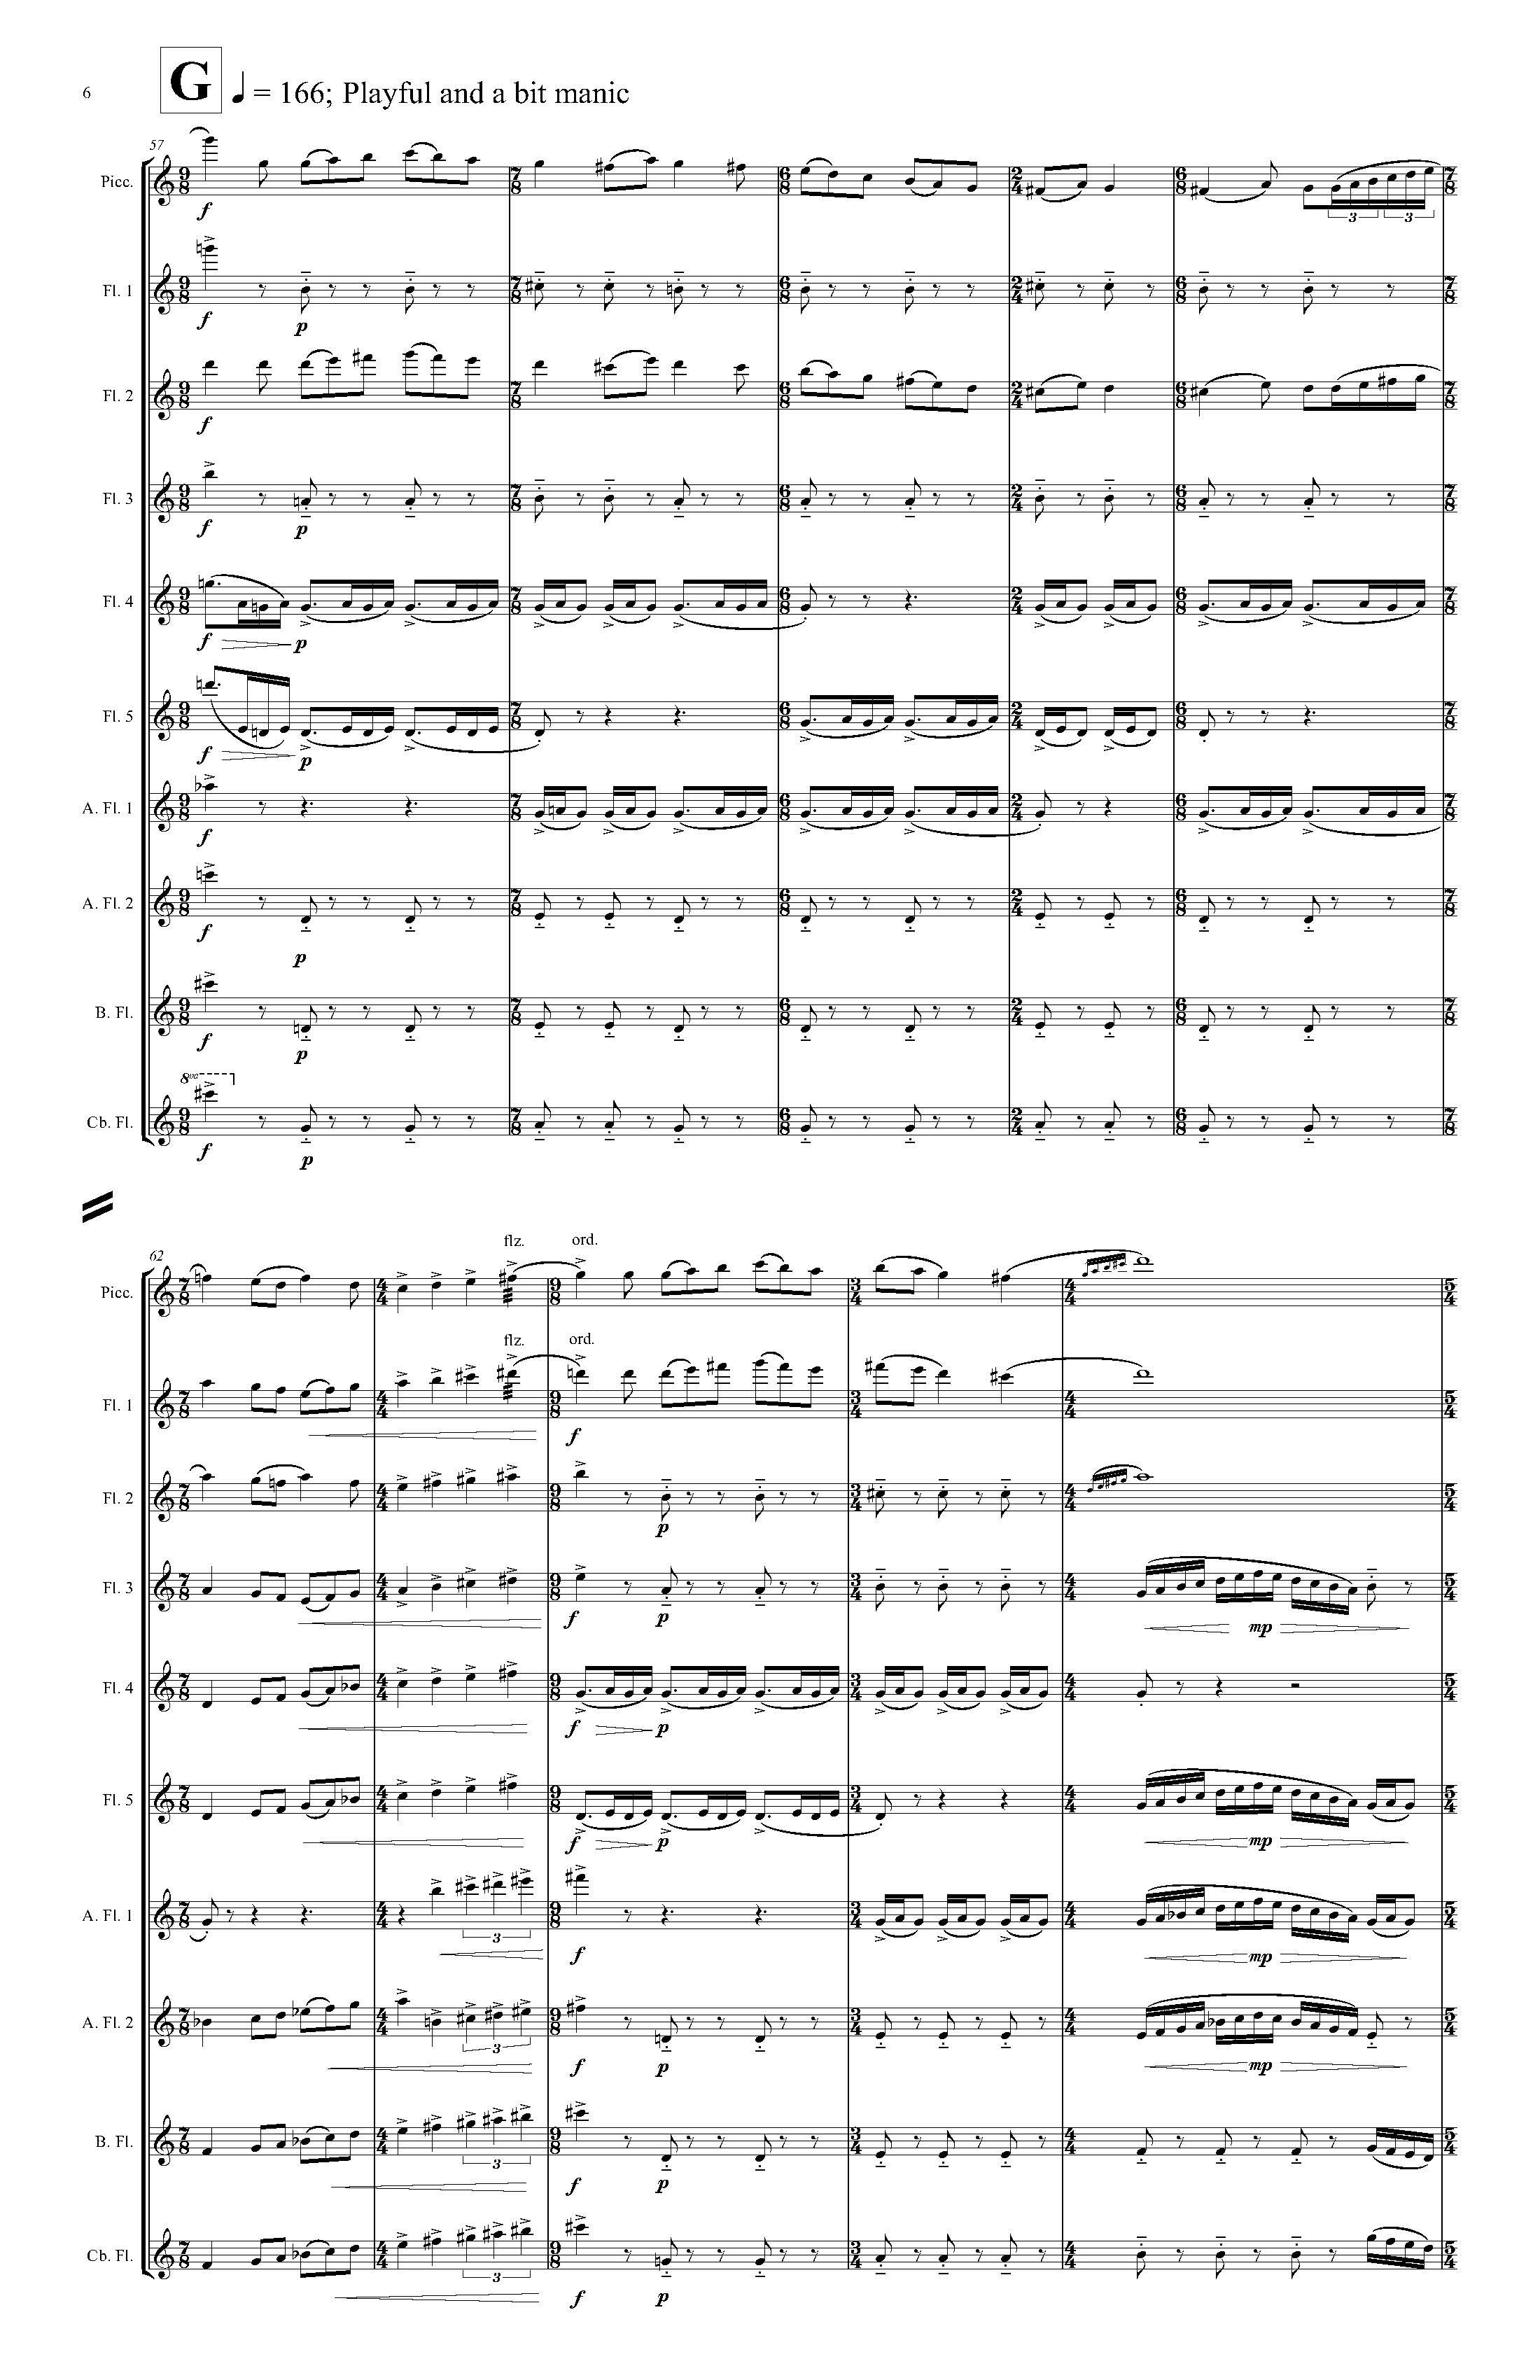 PIPES - Complete Score_Page_12.jpg